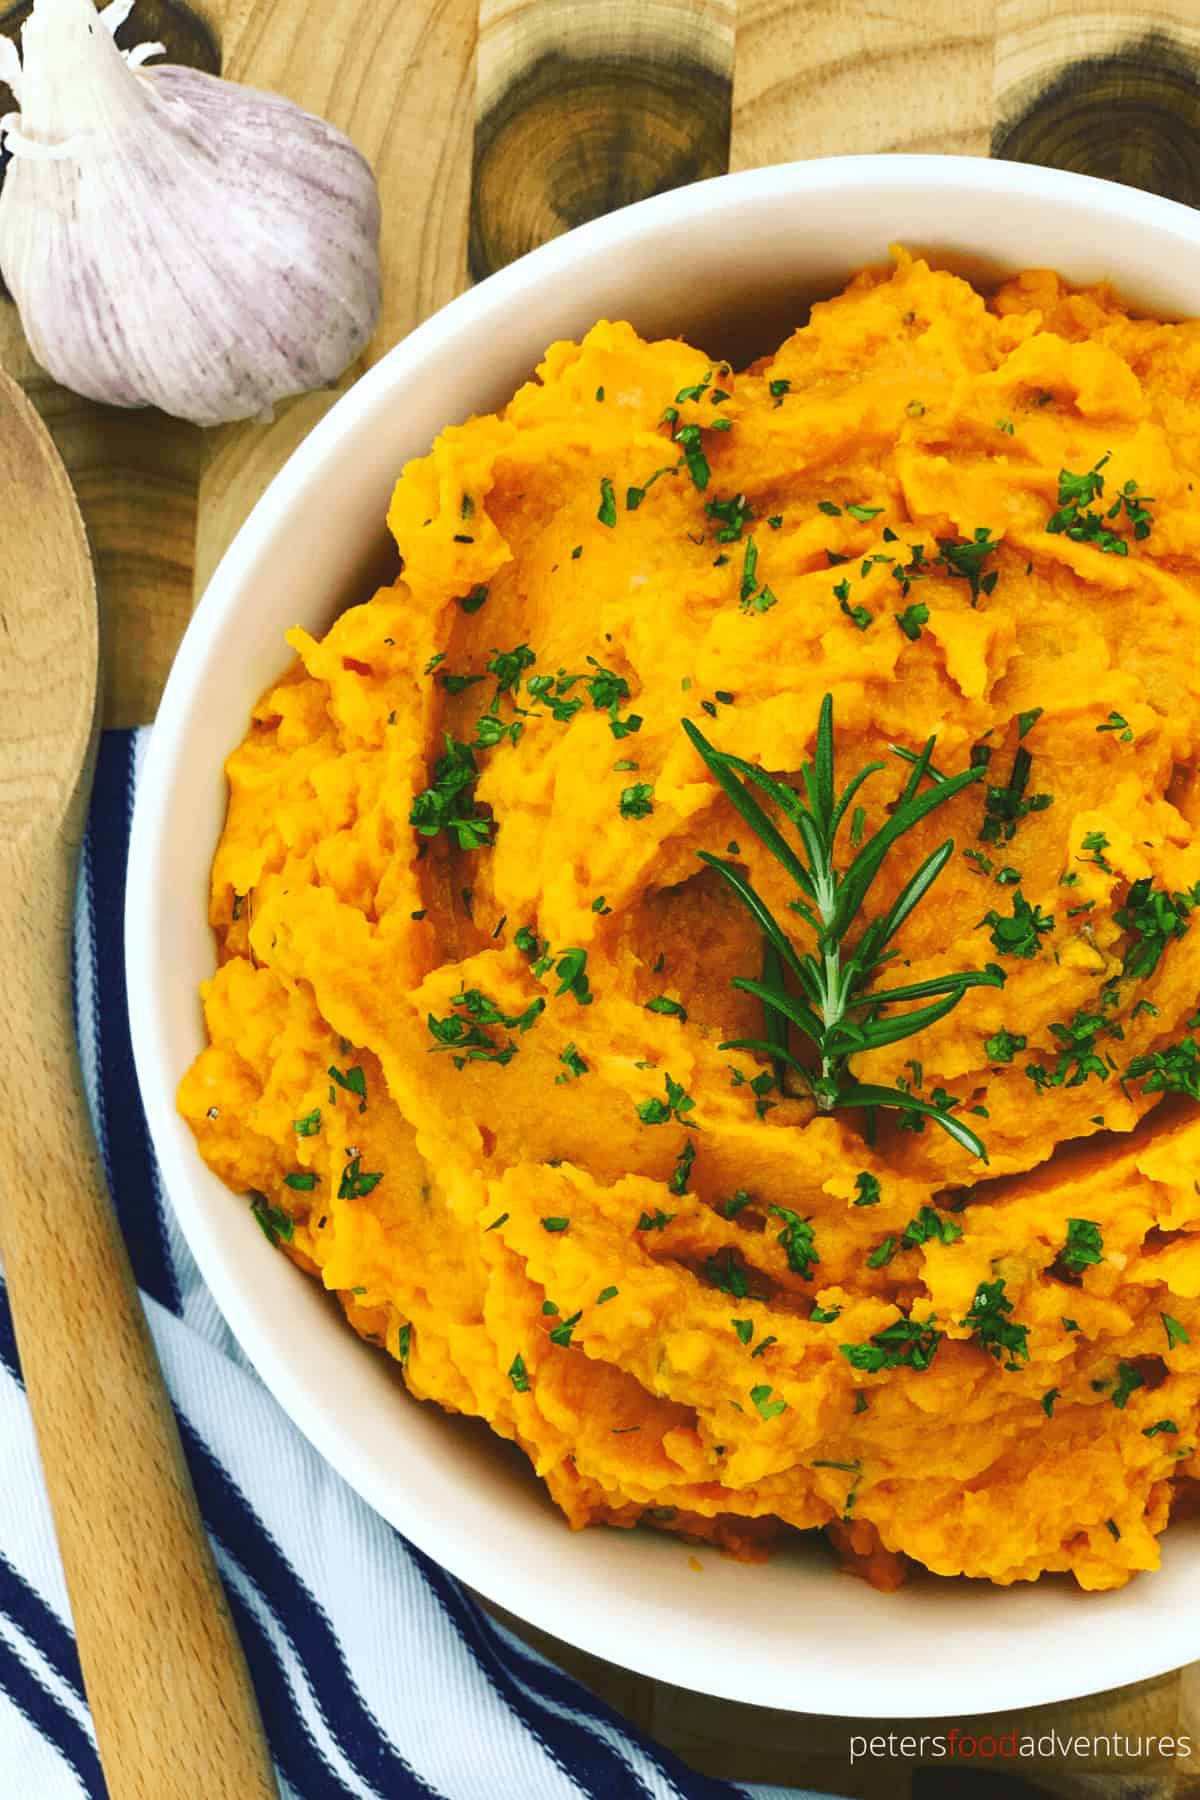 Smooth and creamy Mashed Sweet Potatoes are the perfect side dish for dinner, Thanksgiving or Christmas. Packed with flavor from fresh rosemary and garlic, quick, easy and healthy.